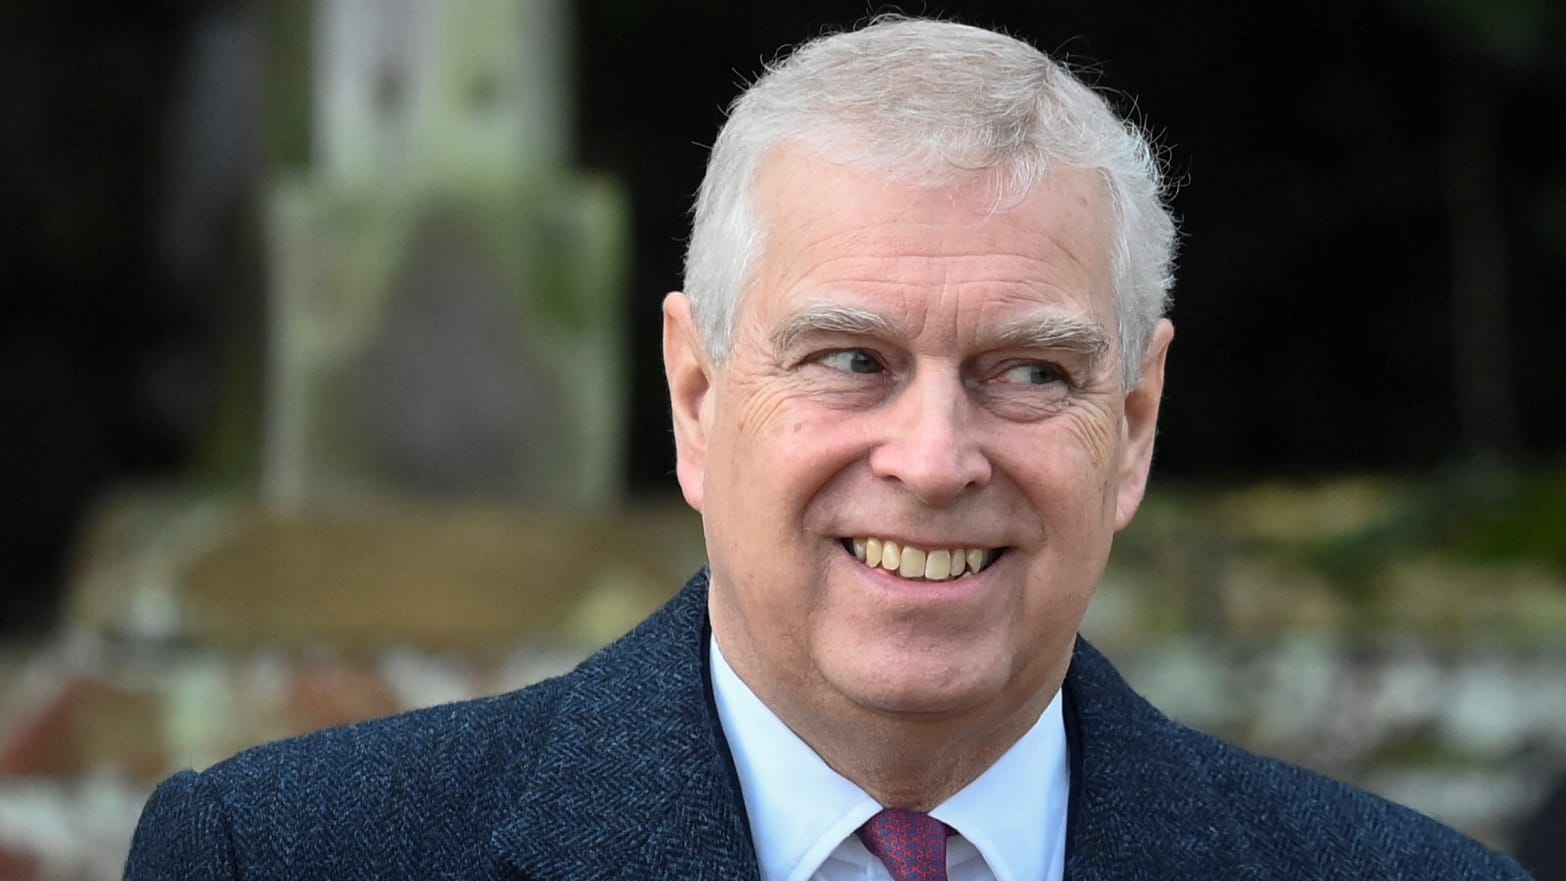 Prince Andrew attends the Royal Family's Christmas Day service at St. Mary Magdalene's church, as the Royals take residence at the Sandringham estate in eastern England, Britain December 25, 2022.